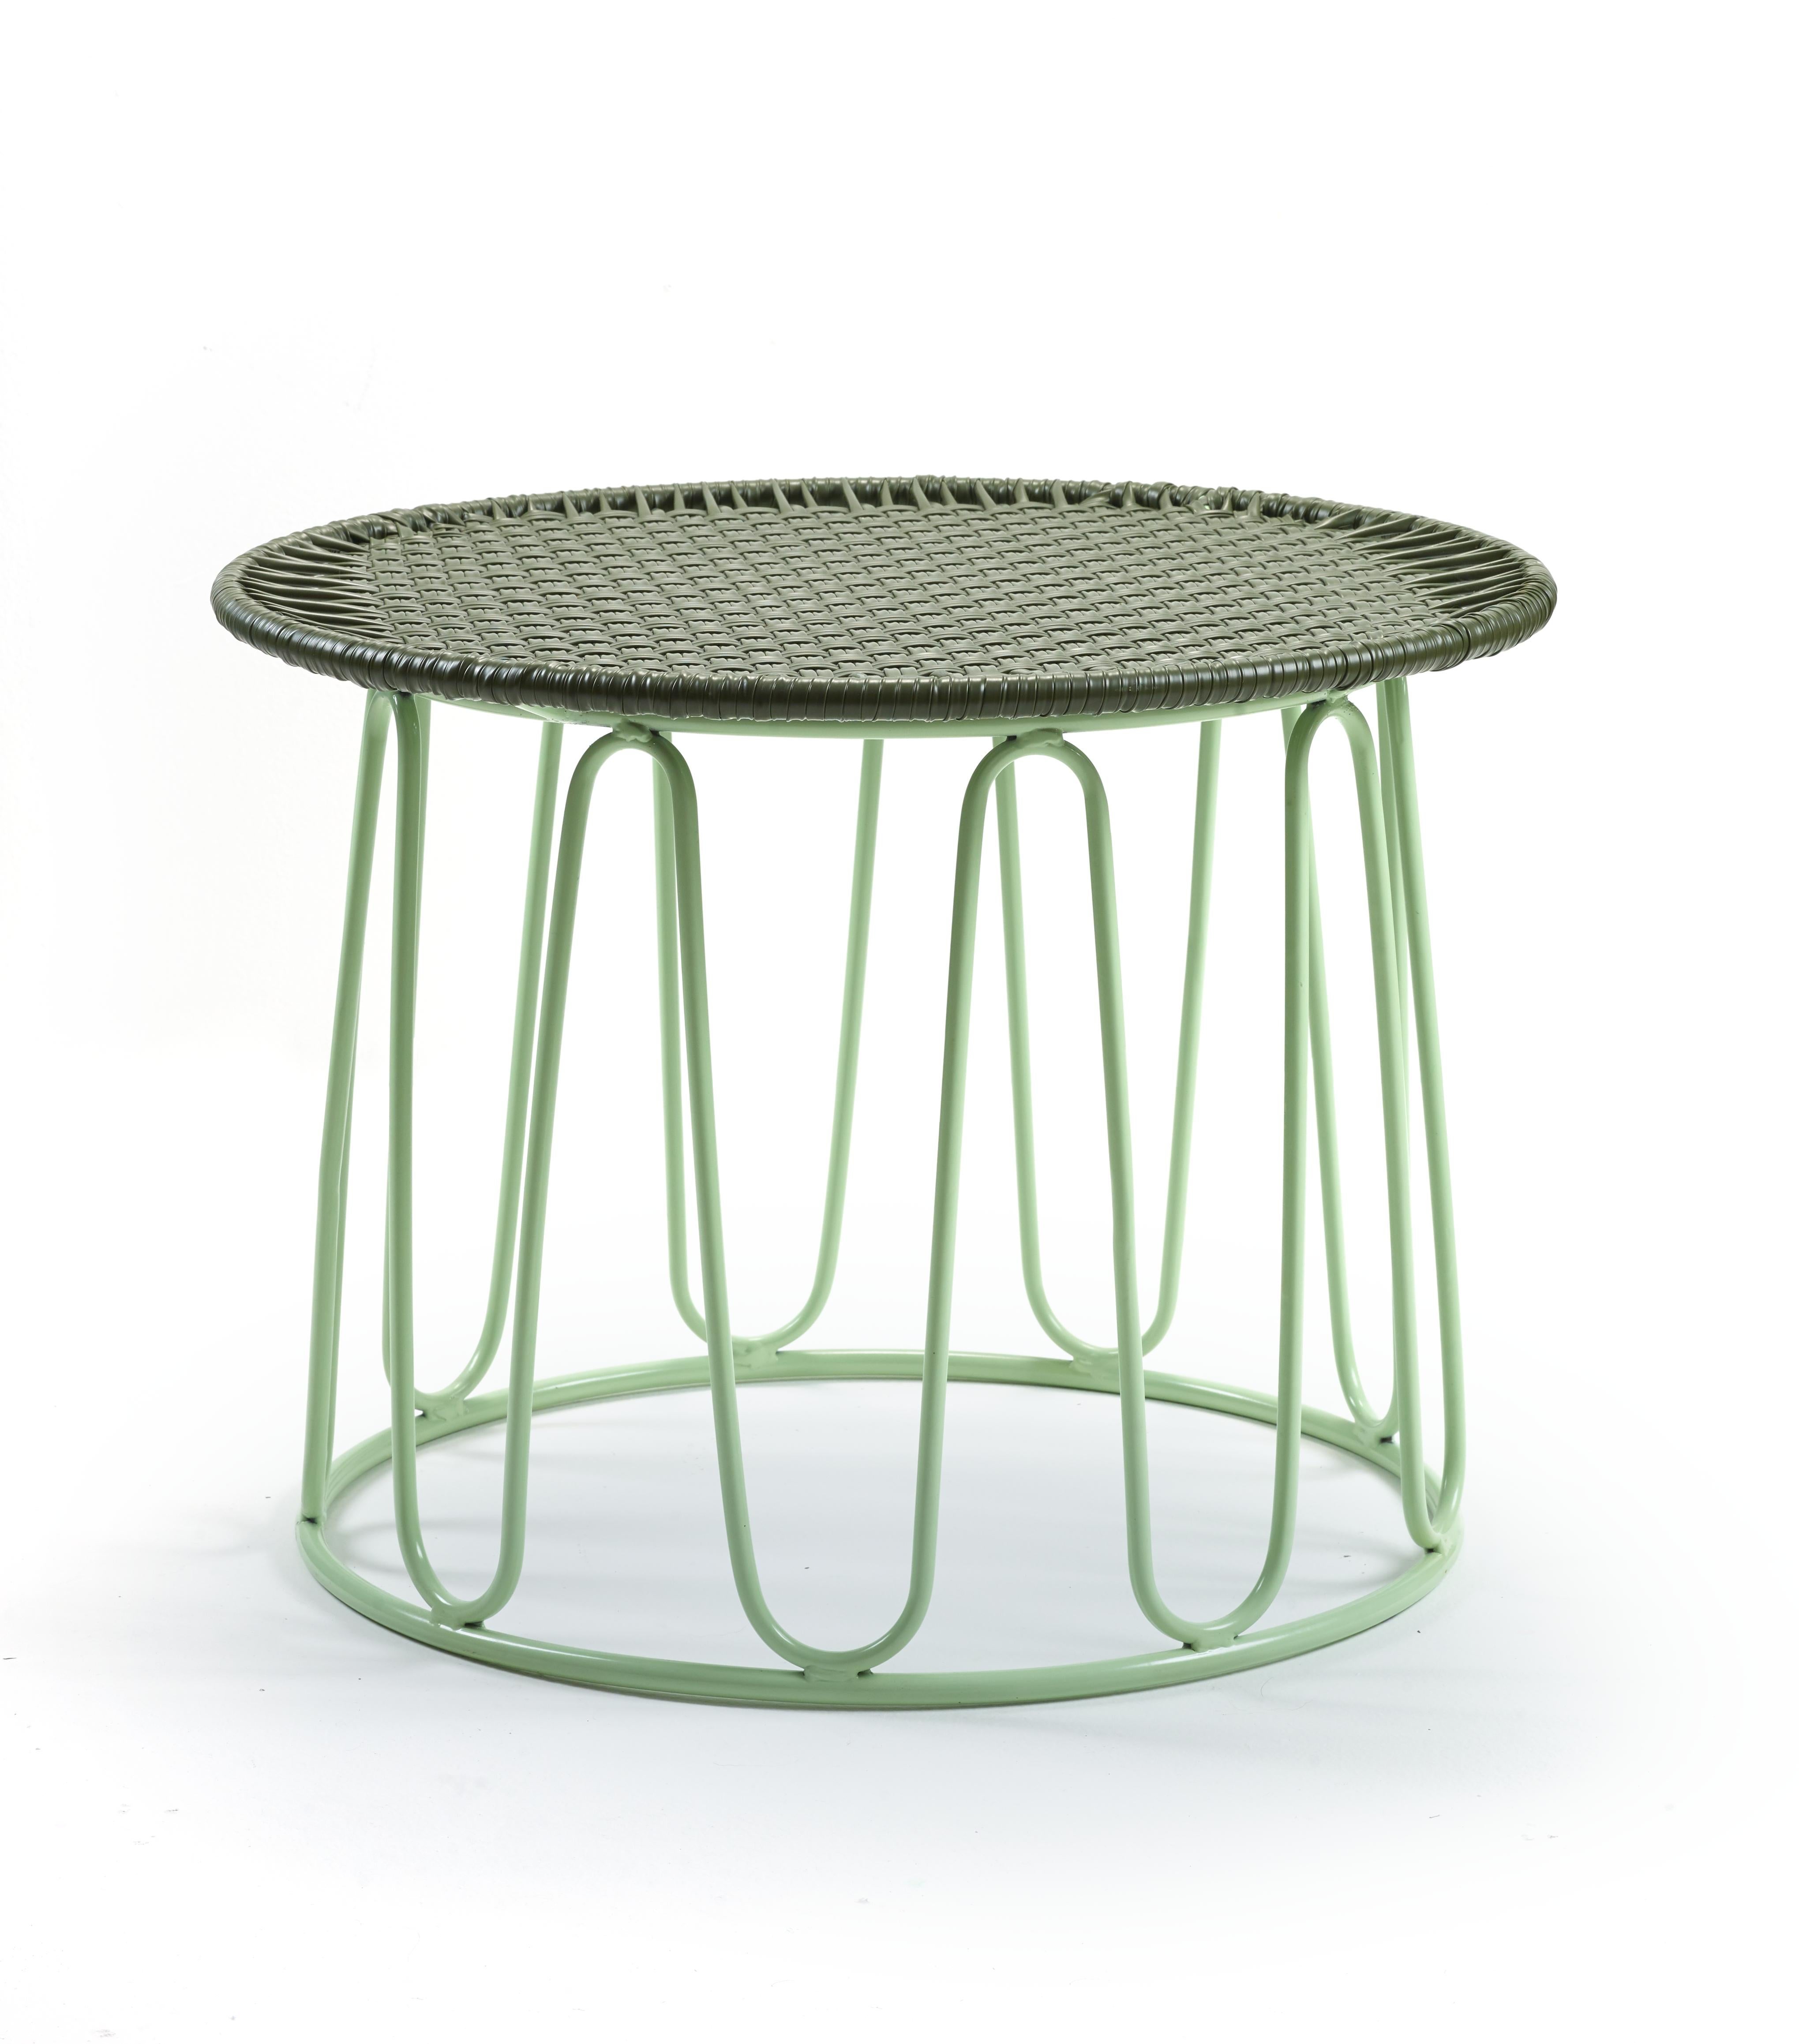 Olive circo side table by Sebastian Herkner.
Materials: Galvanized and powder-coated tubular steel. PVC strings.
Technique: Made from recycled plastic. Weaved by local craftspeople in Colombia. 
Dimensions: 
Top diameter 55 cm 
Base diameter 51